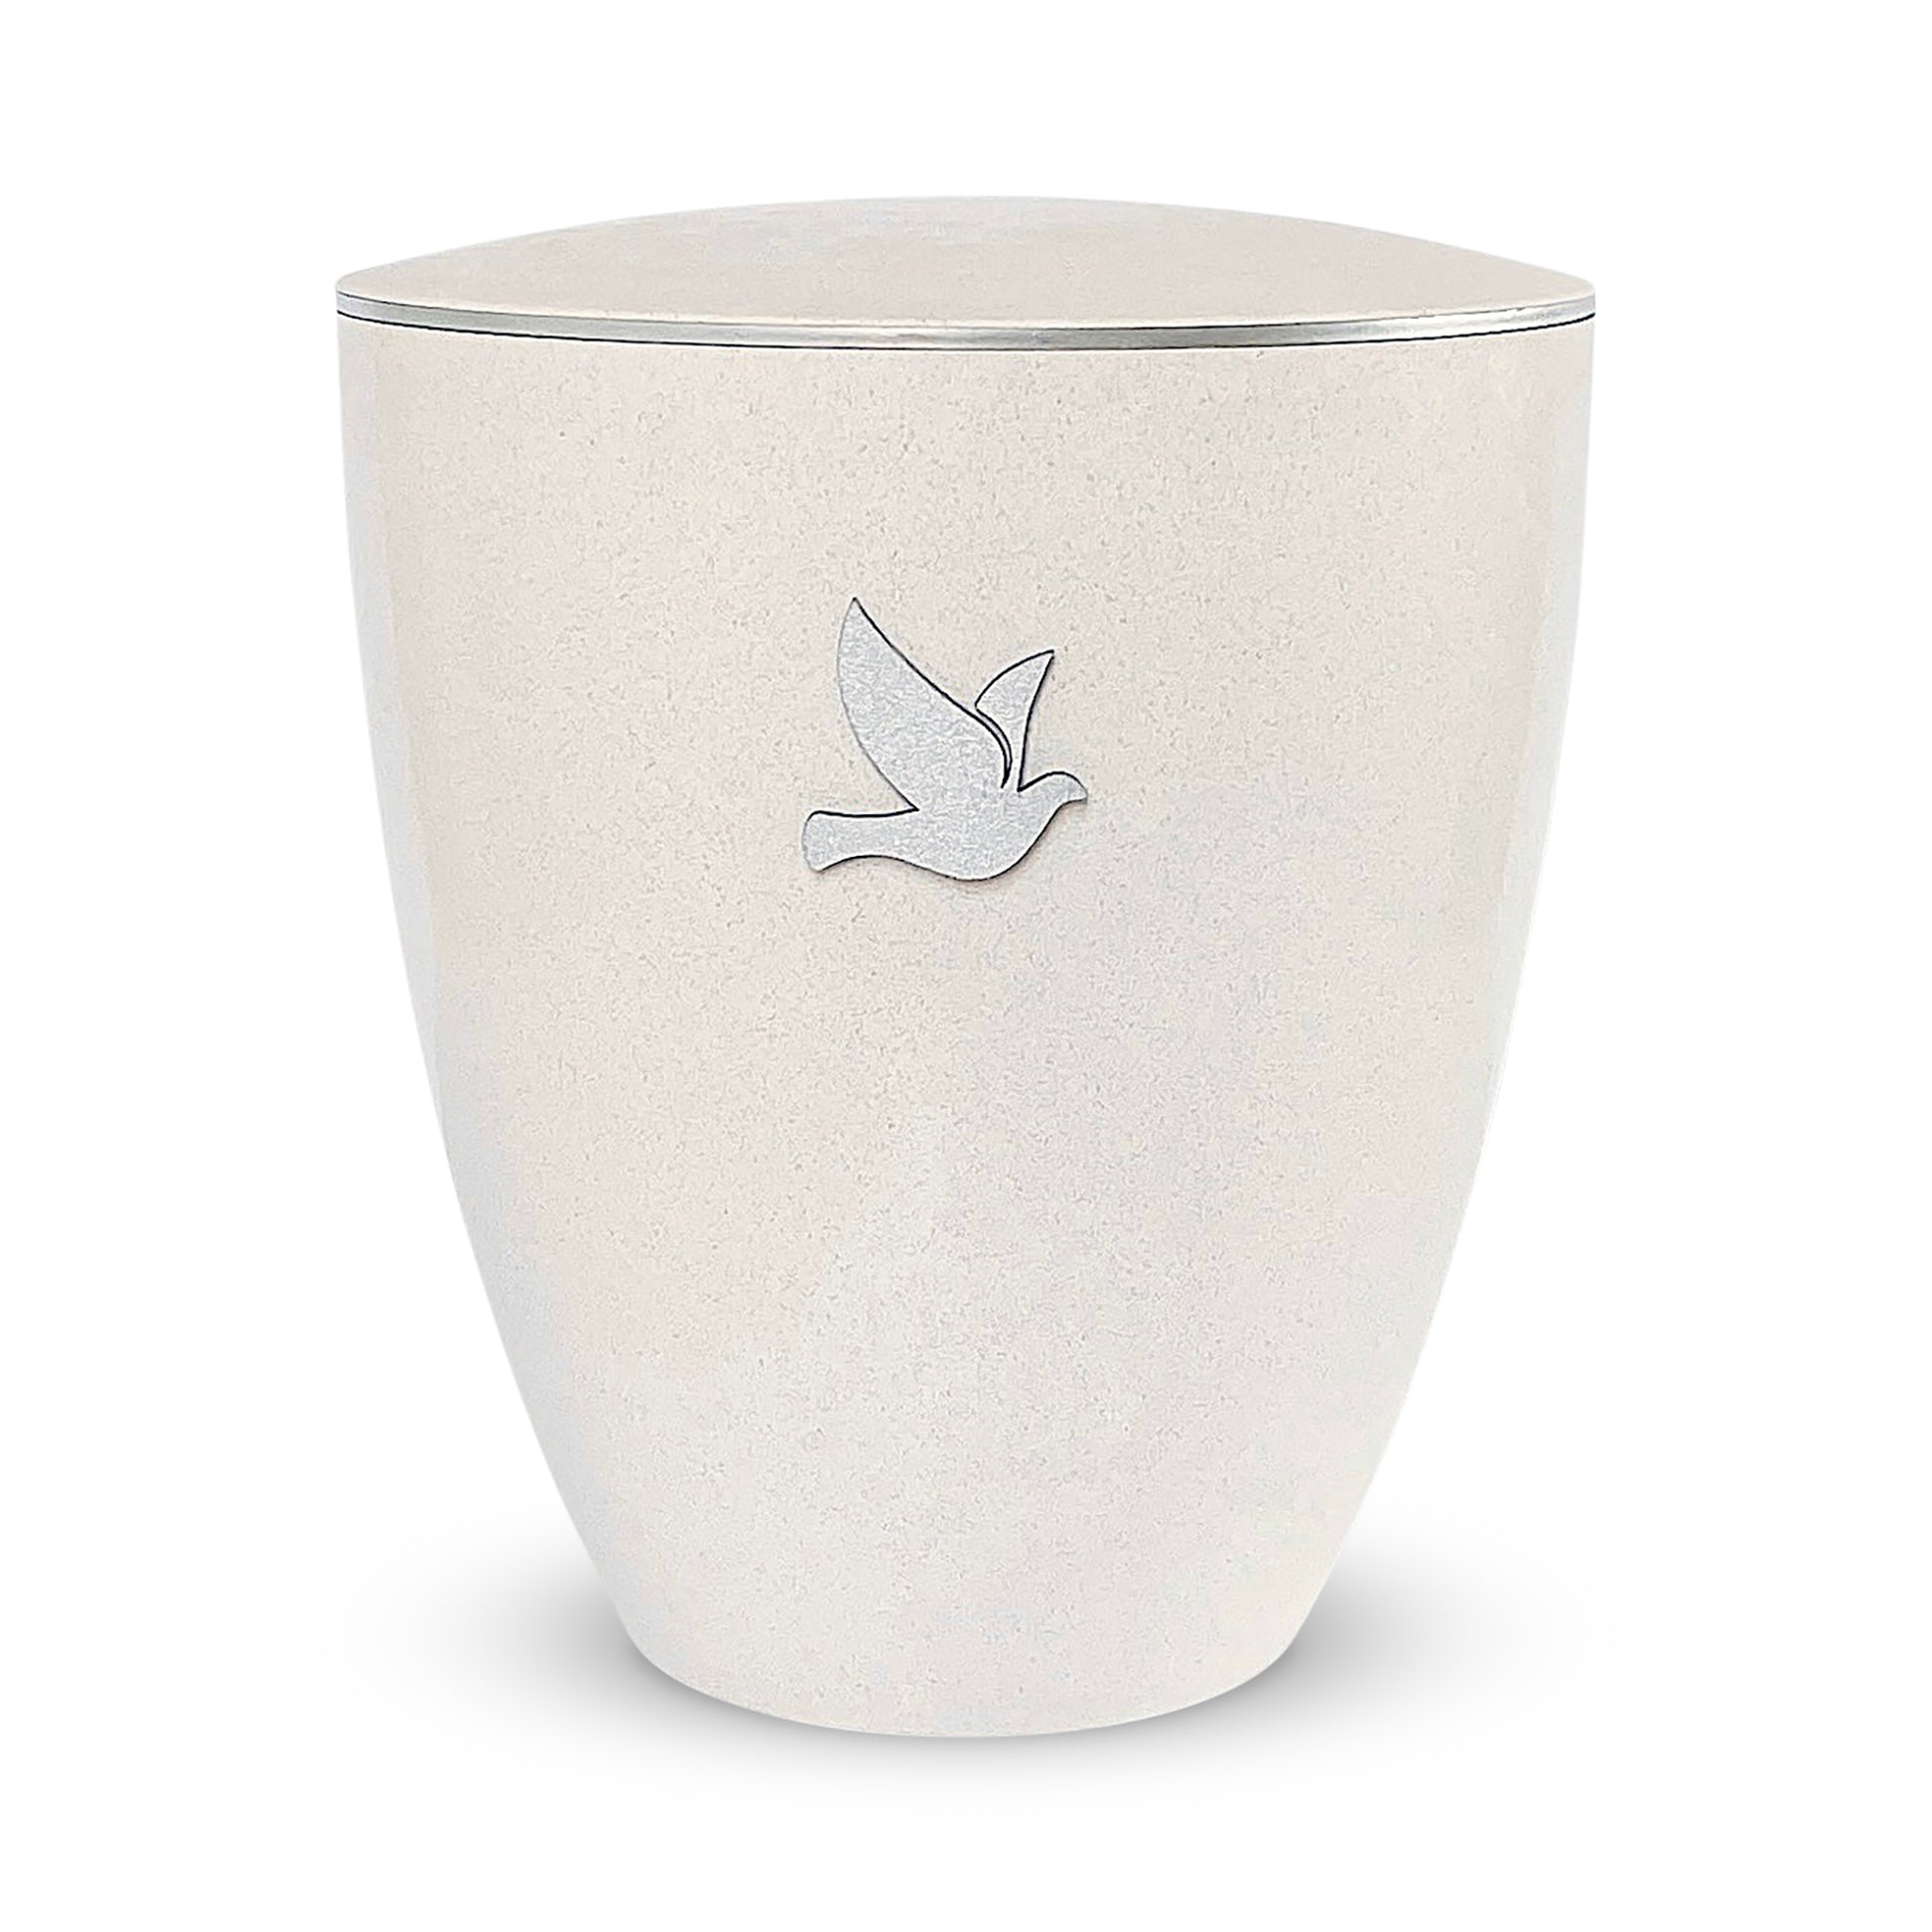 Stunning off-white cremation urn with a silver dove .